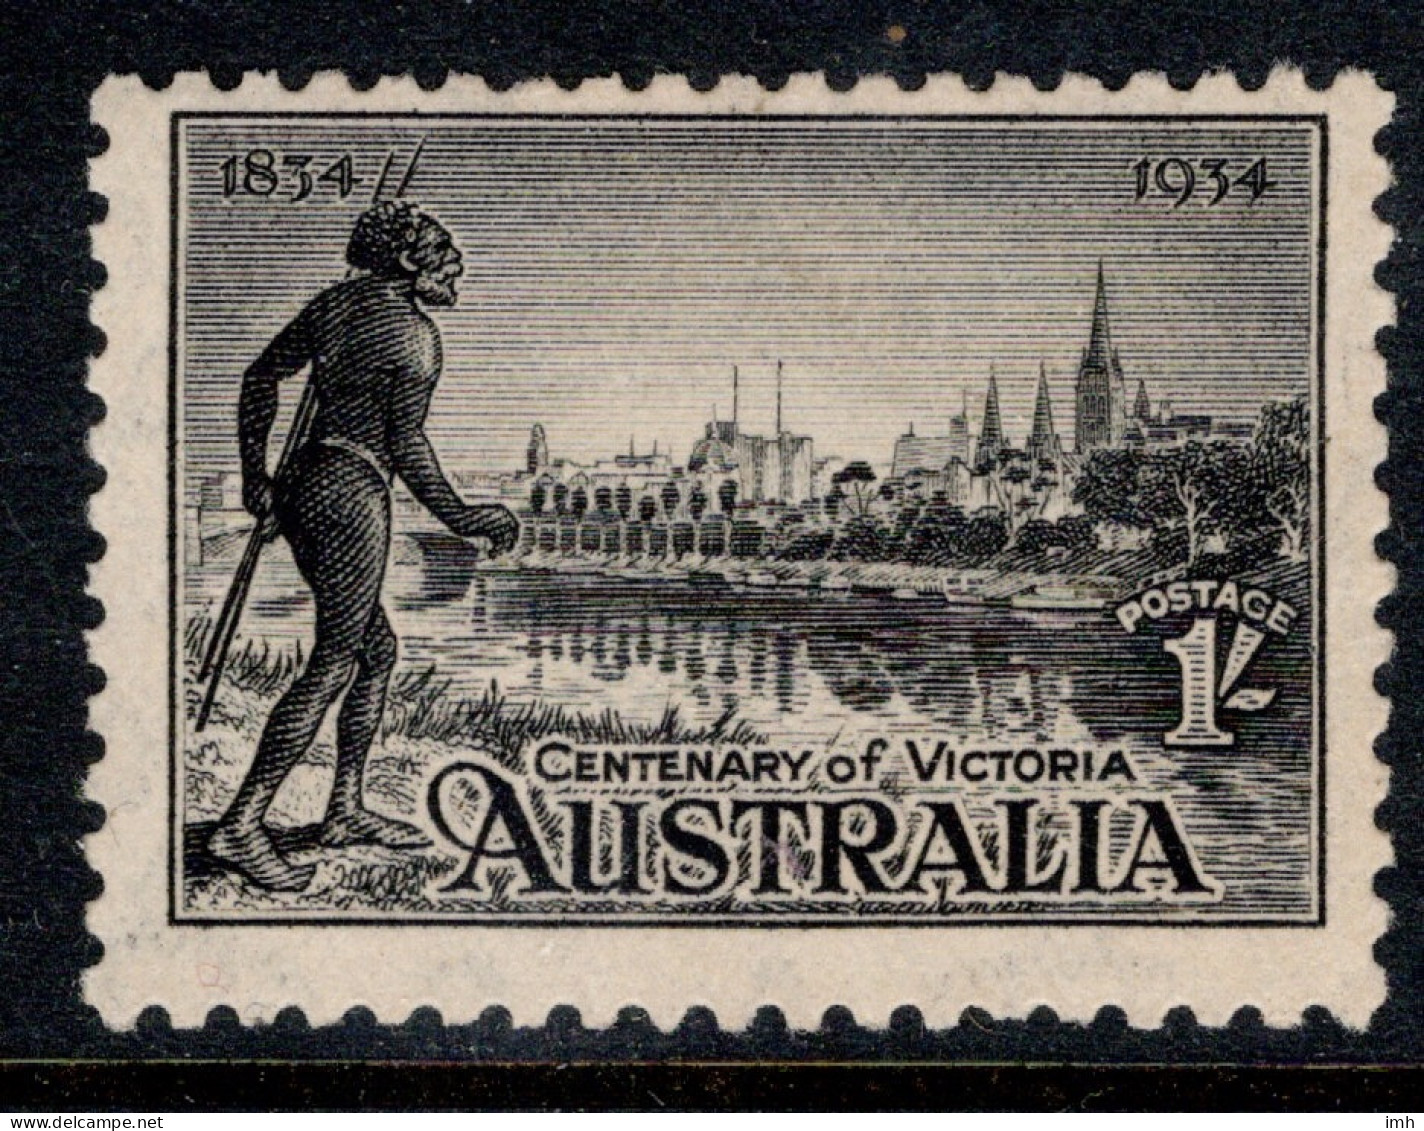 1934 Australia, SG 149 1/- Black (P. 10.5)  Centenary Of Victoria, Mint Lightly Hinged Cat. £55.00 - Mint Stamps